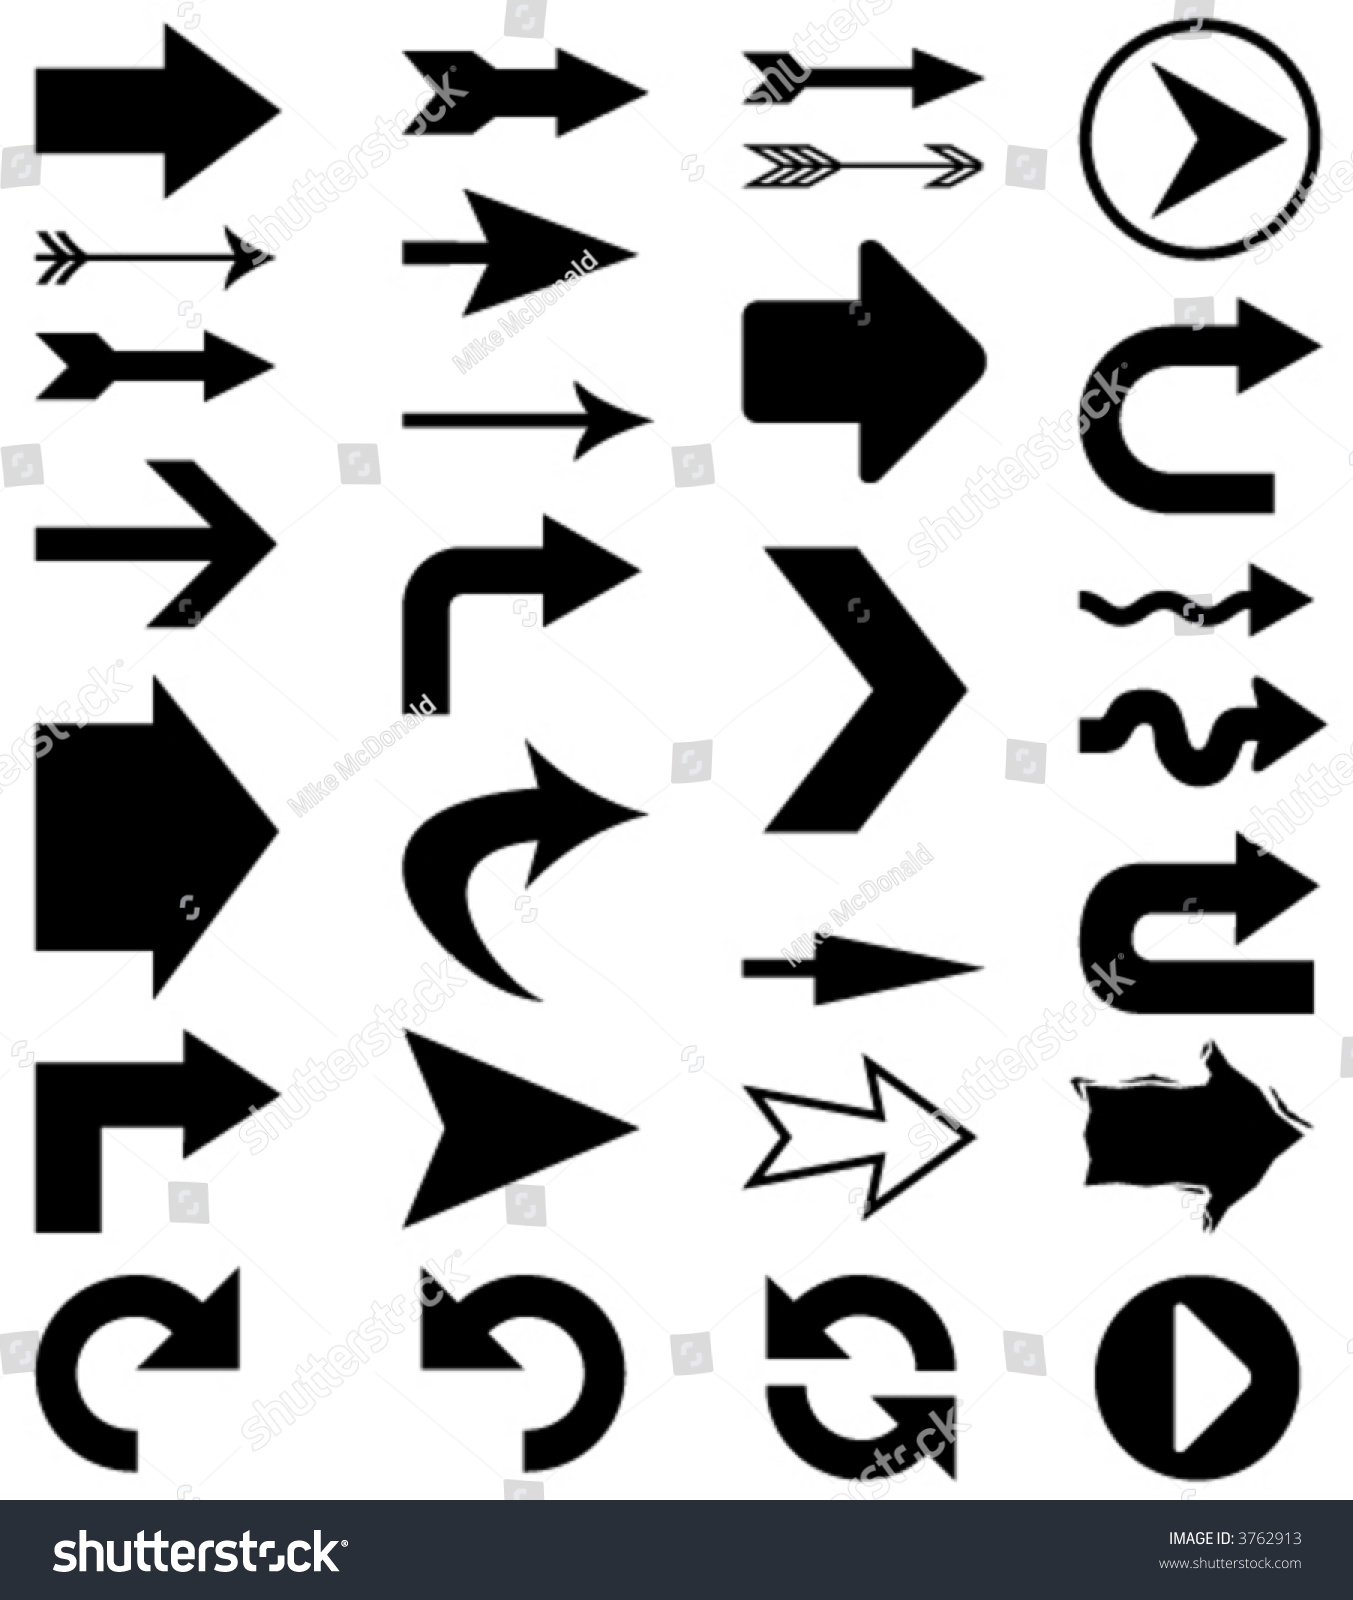 Set of 28 vector arrow shapes in various styles #3762913